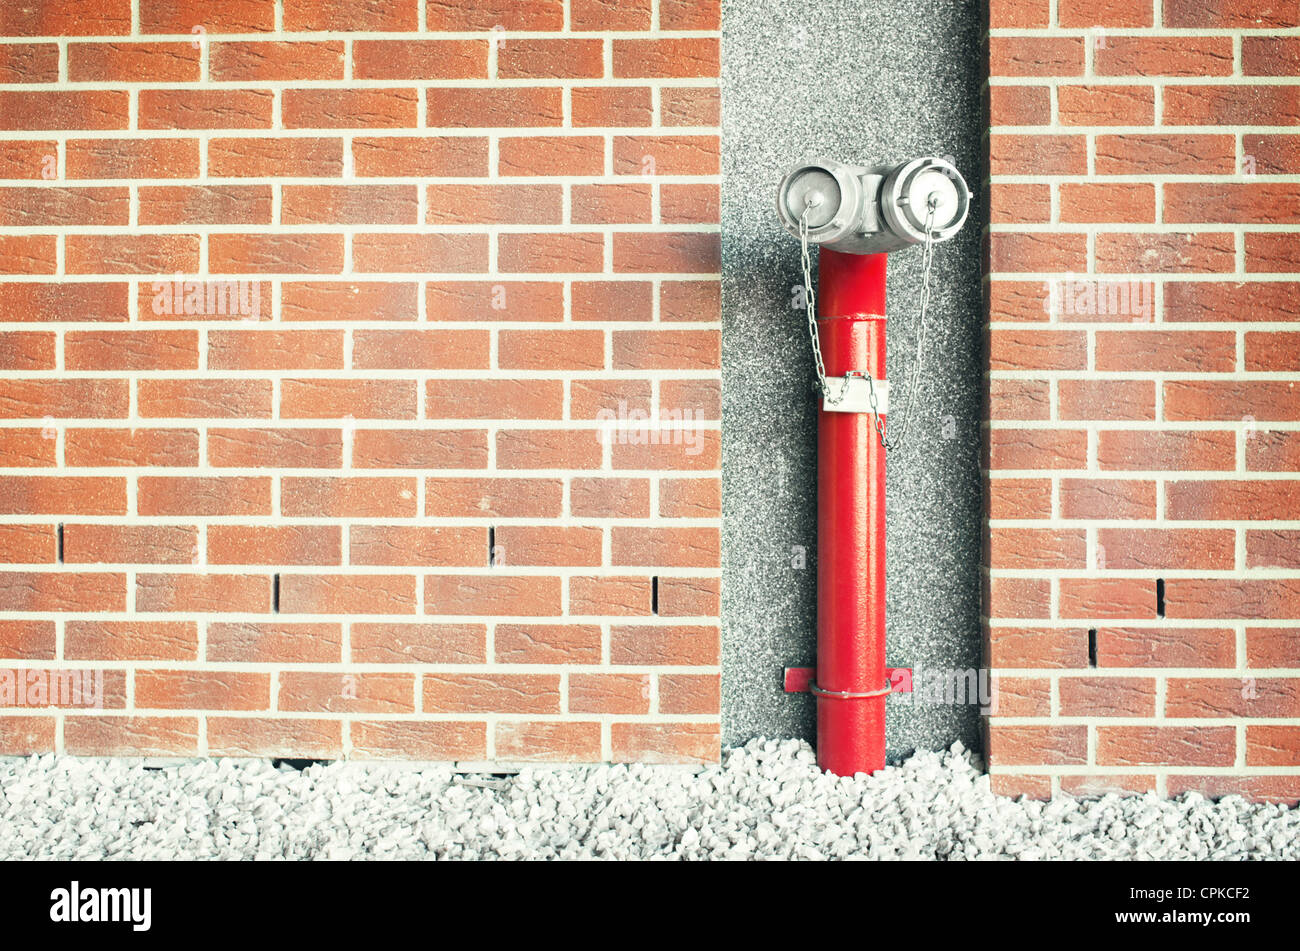 Red fire hydrant in the wall. Stock Photo